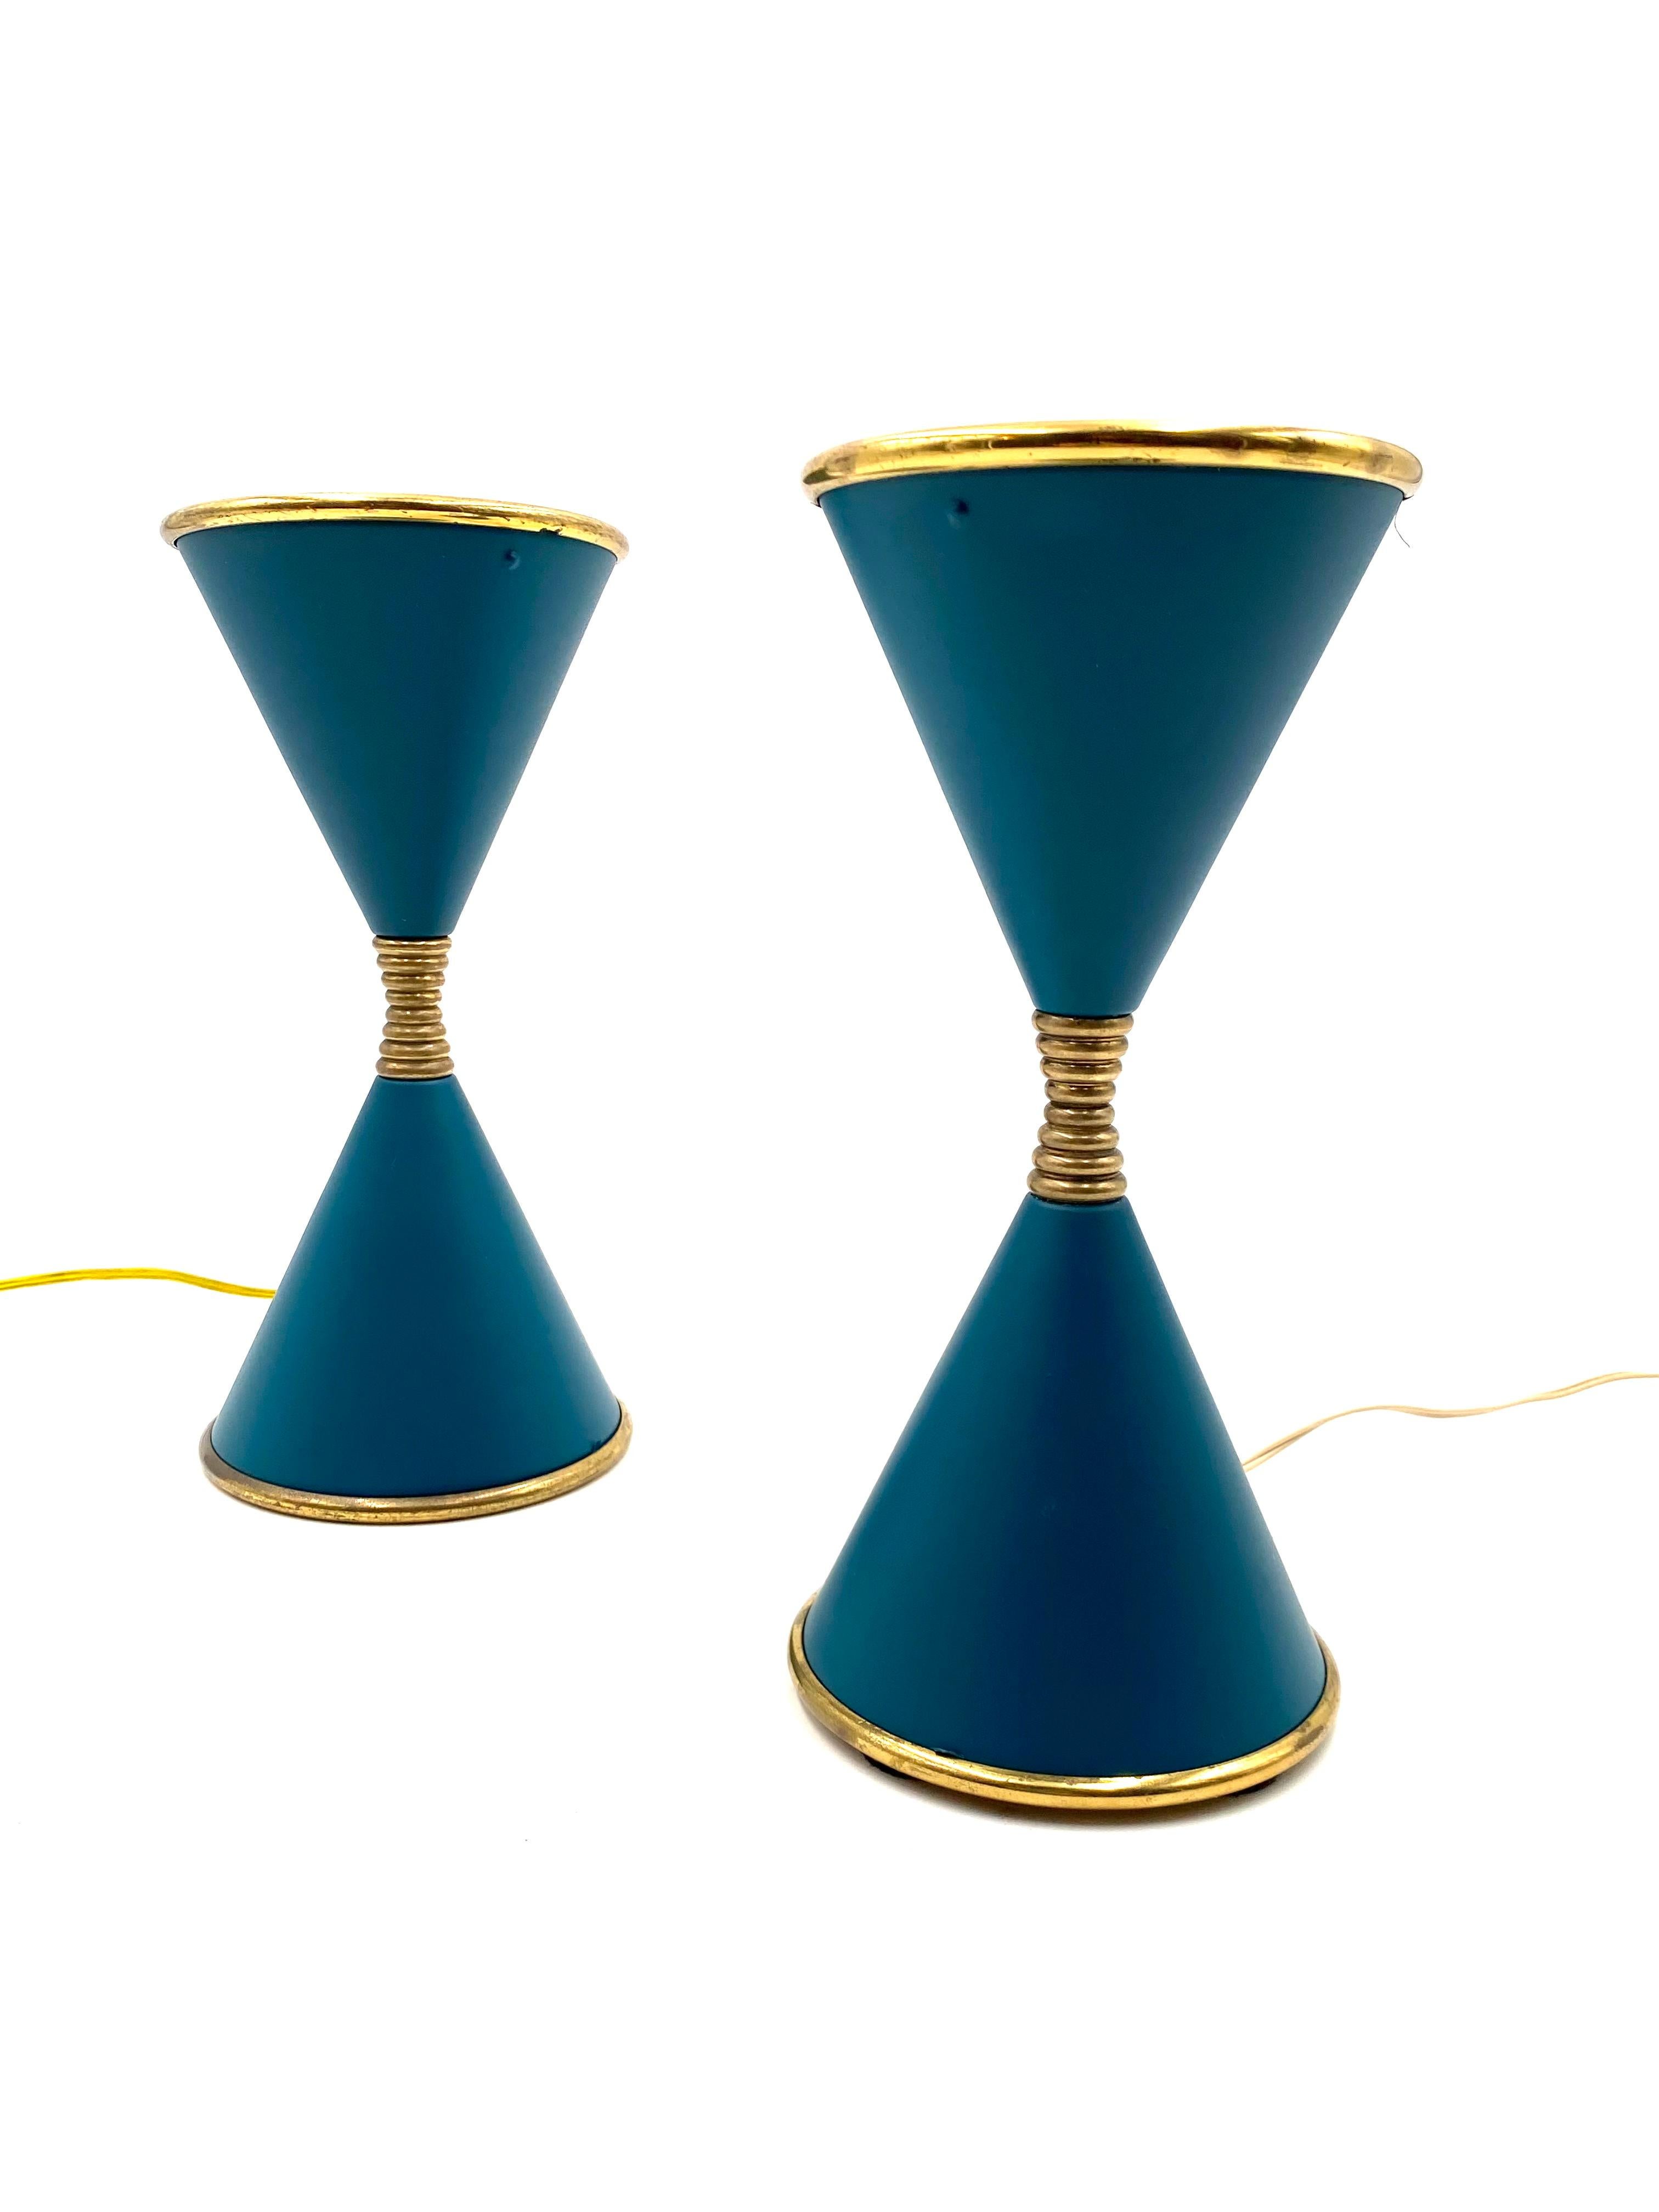 Angelo Lelii, Set of 2 'Clessidra' Table Lamps, Arredoluce, Milan Italy, 1960 For Sale 6